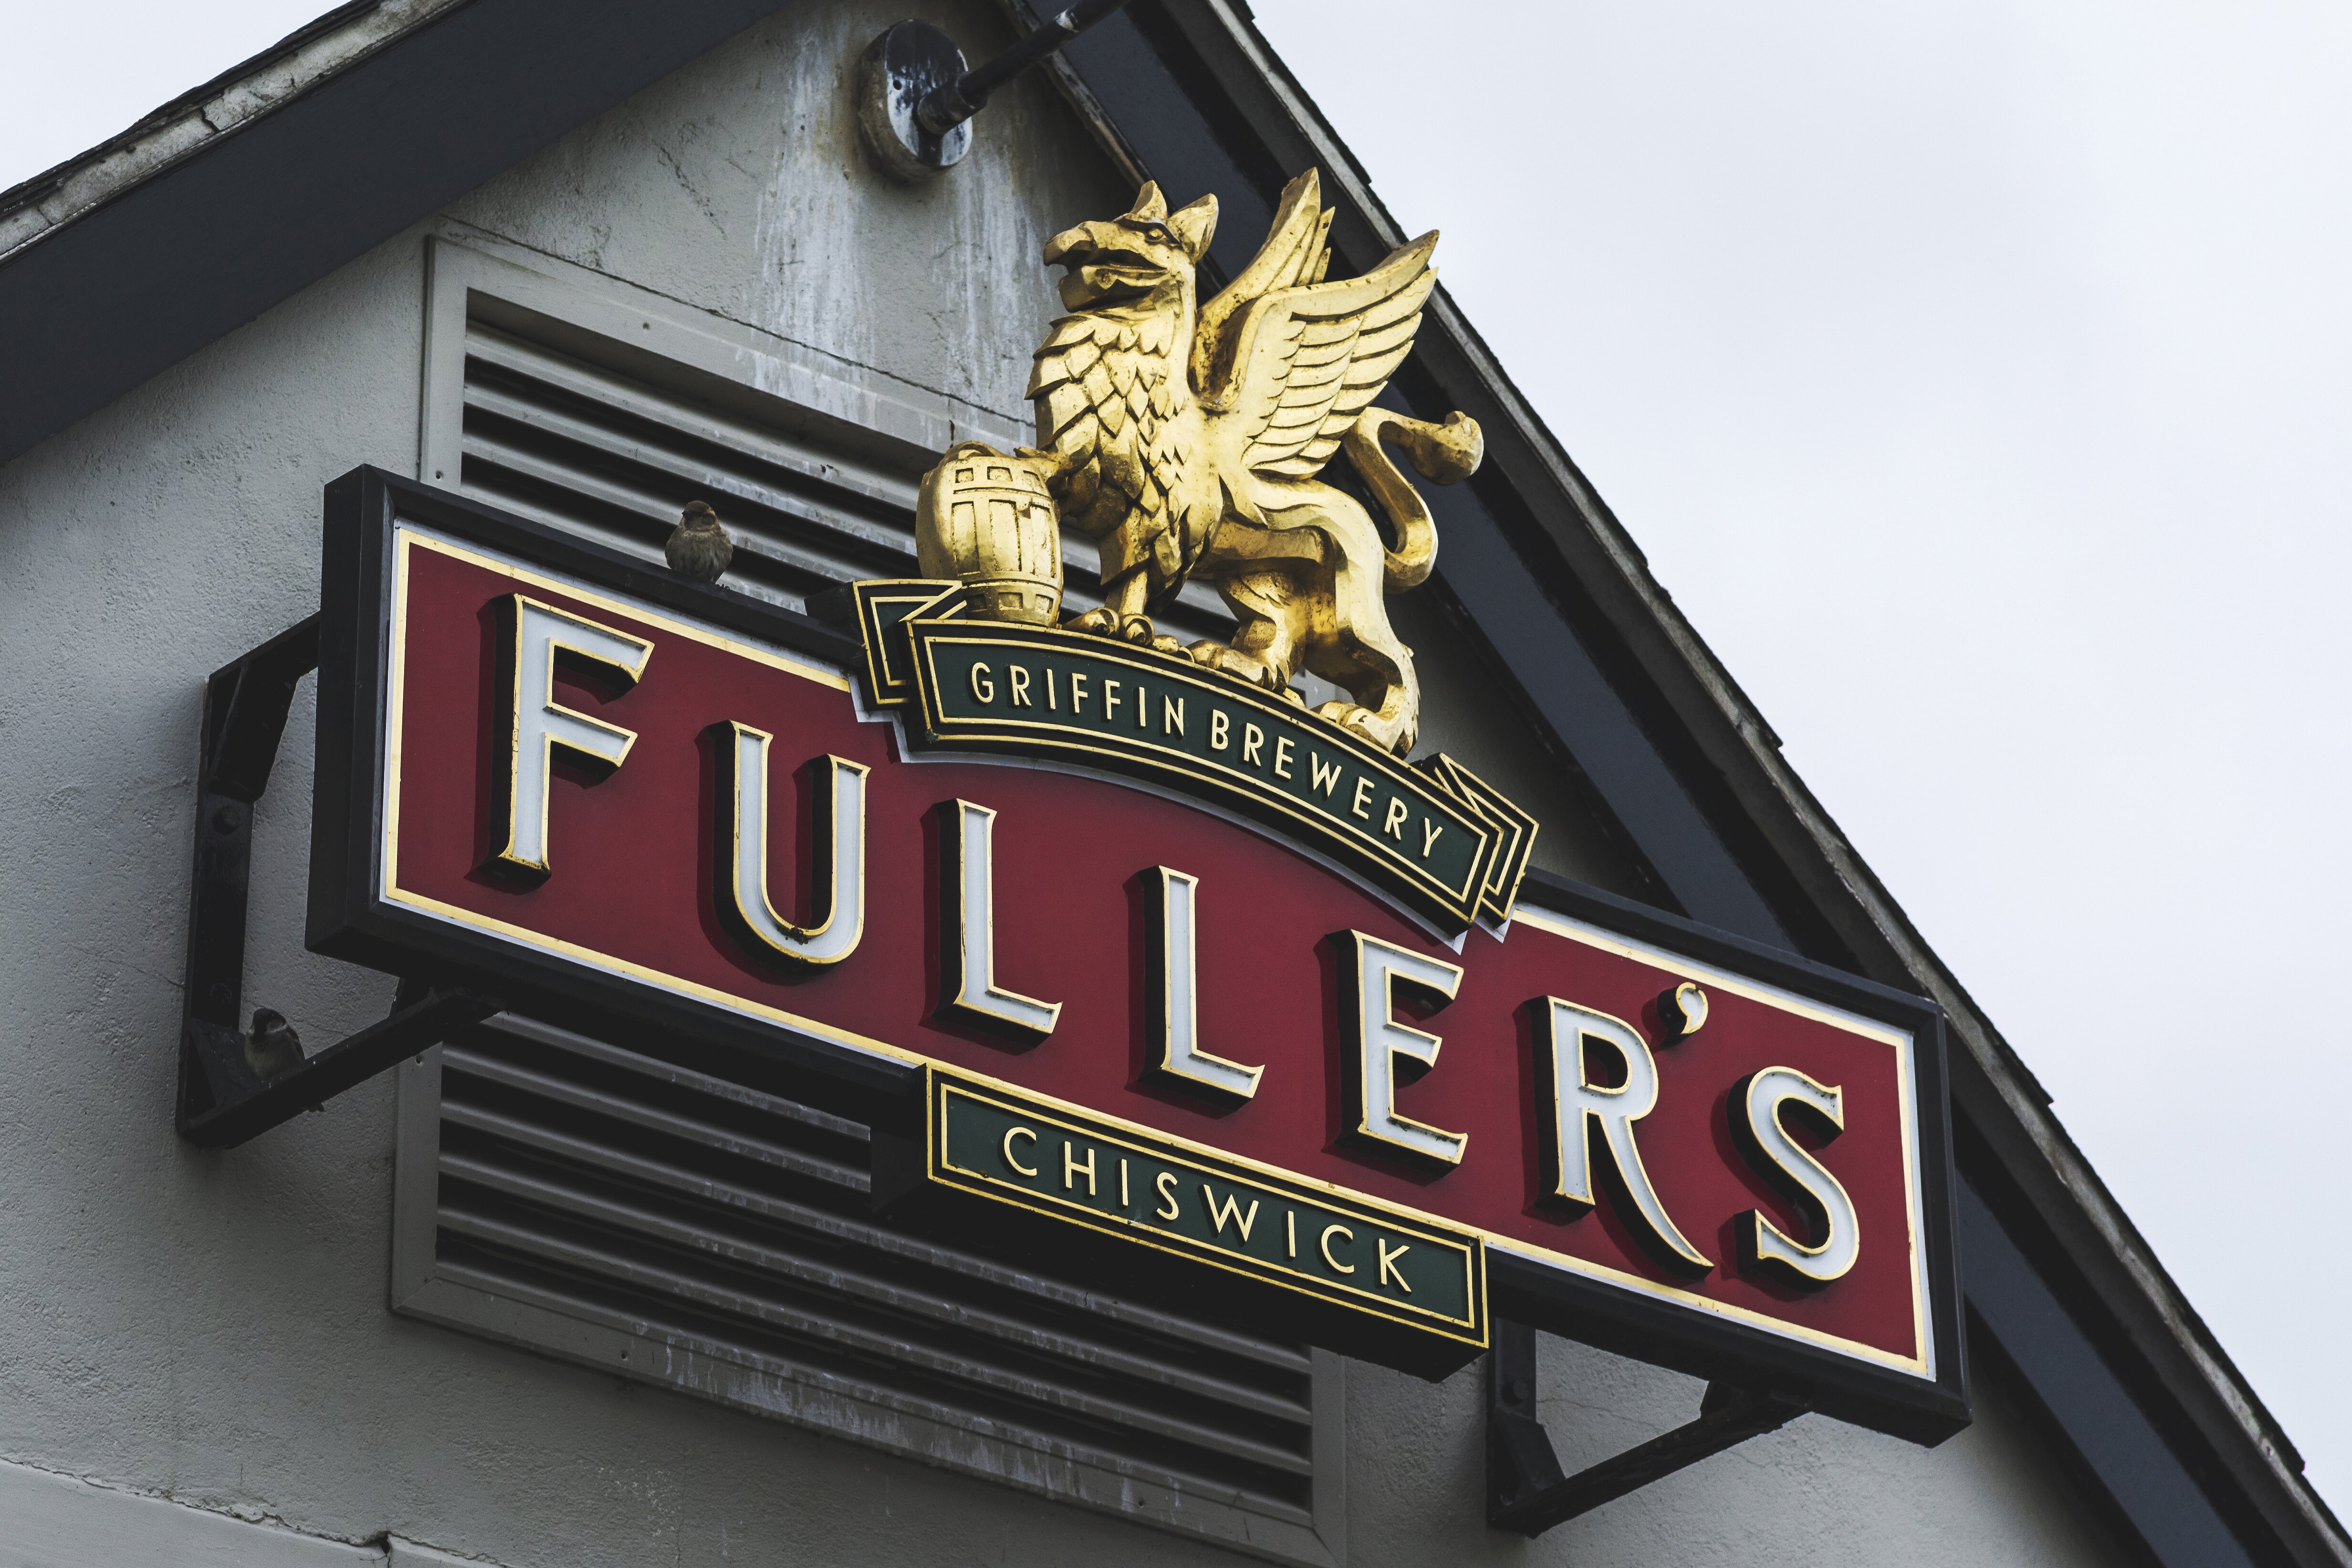 Fuller’s launches legal action over business interruption insurance